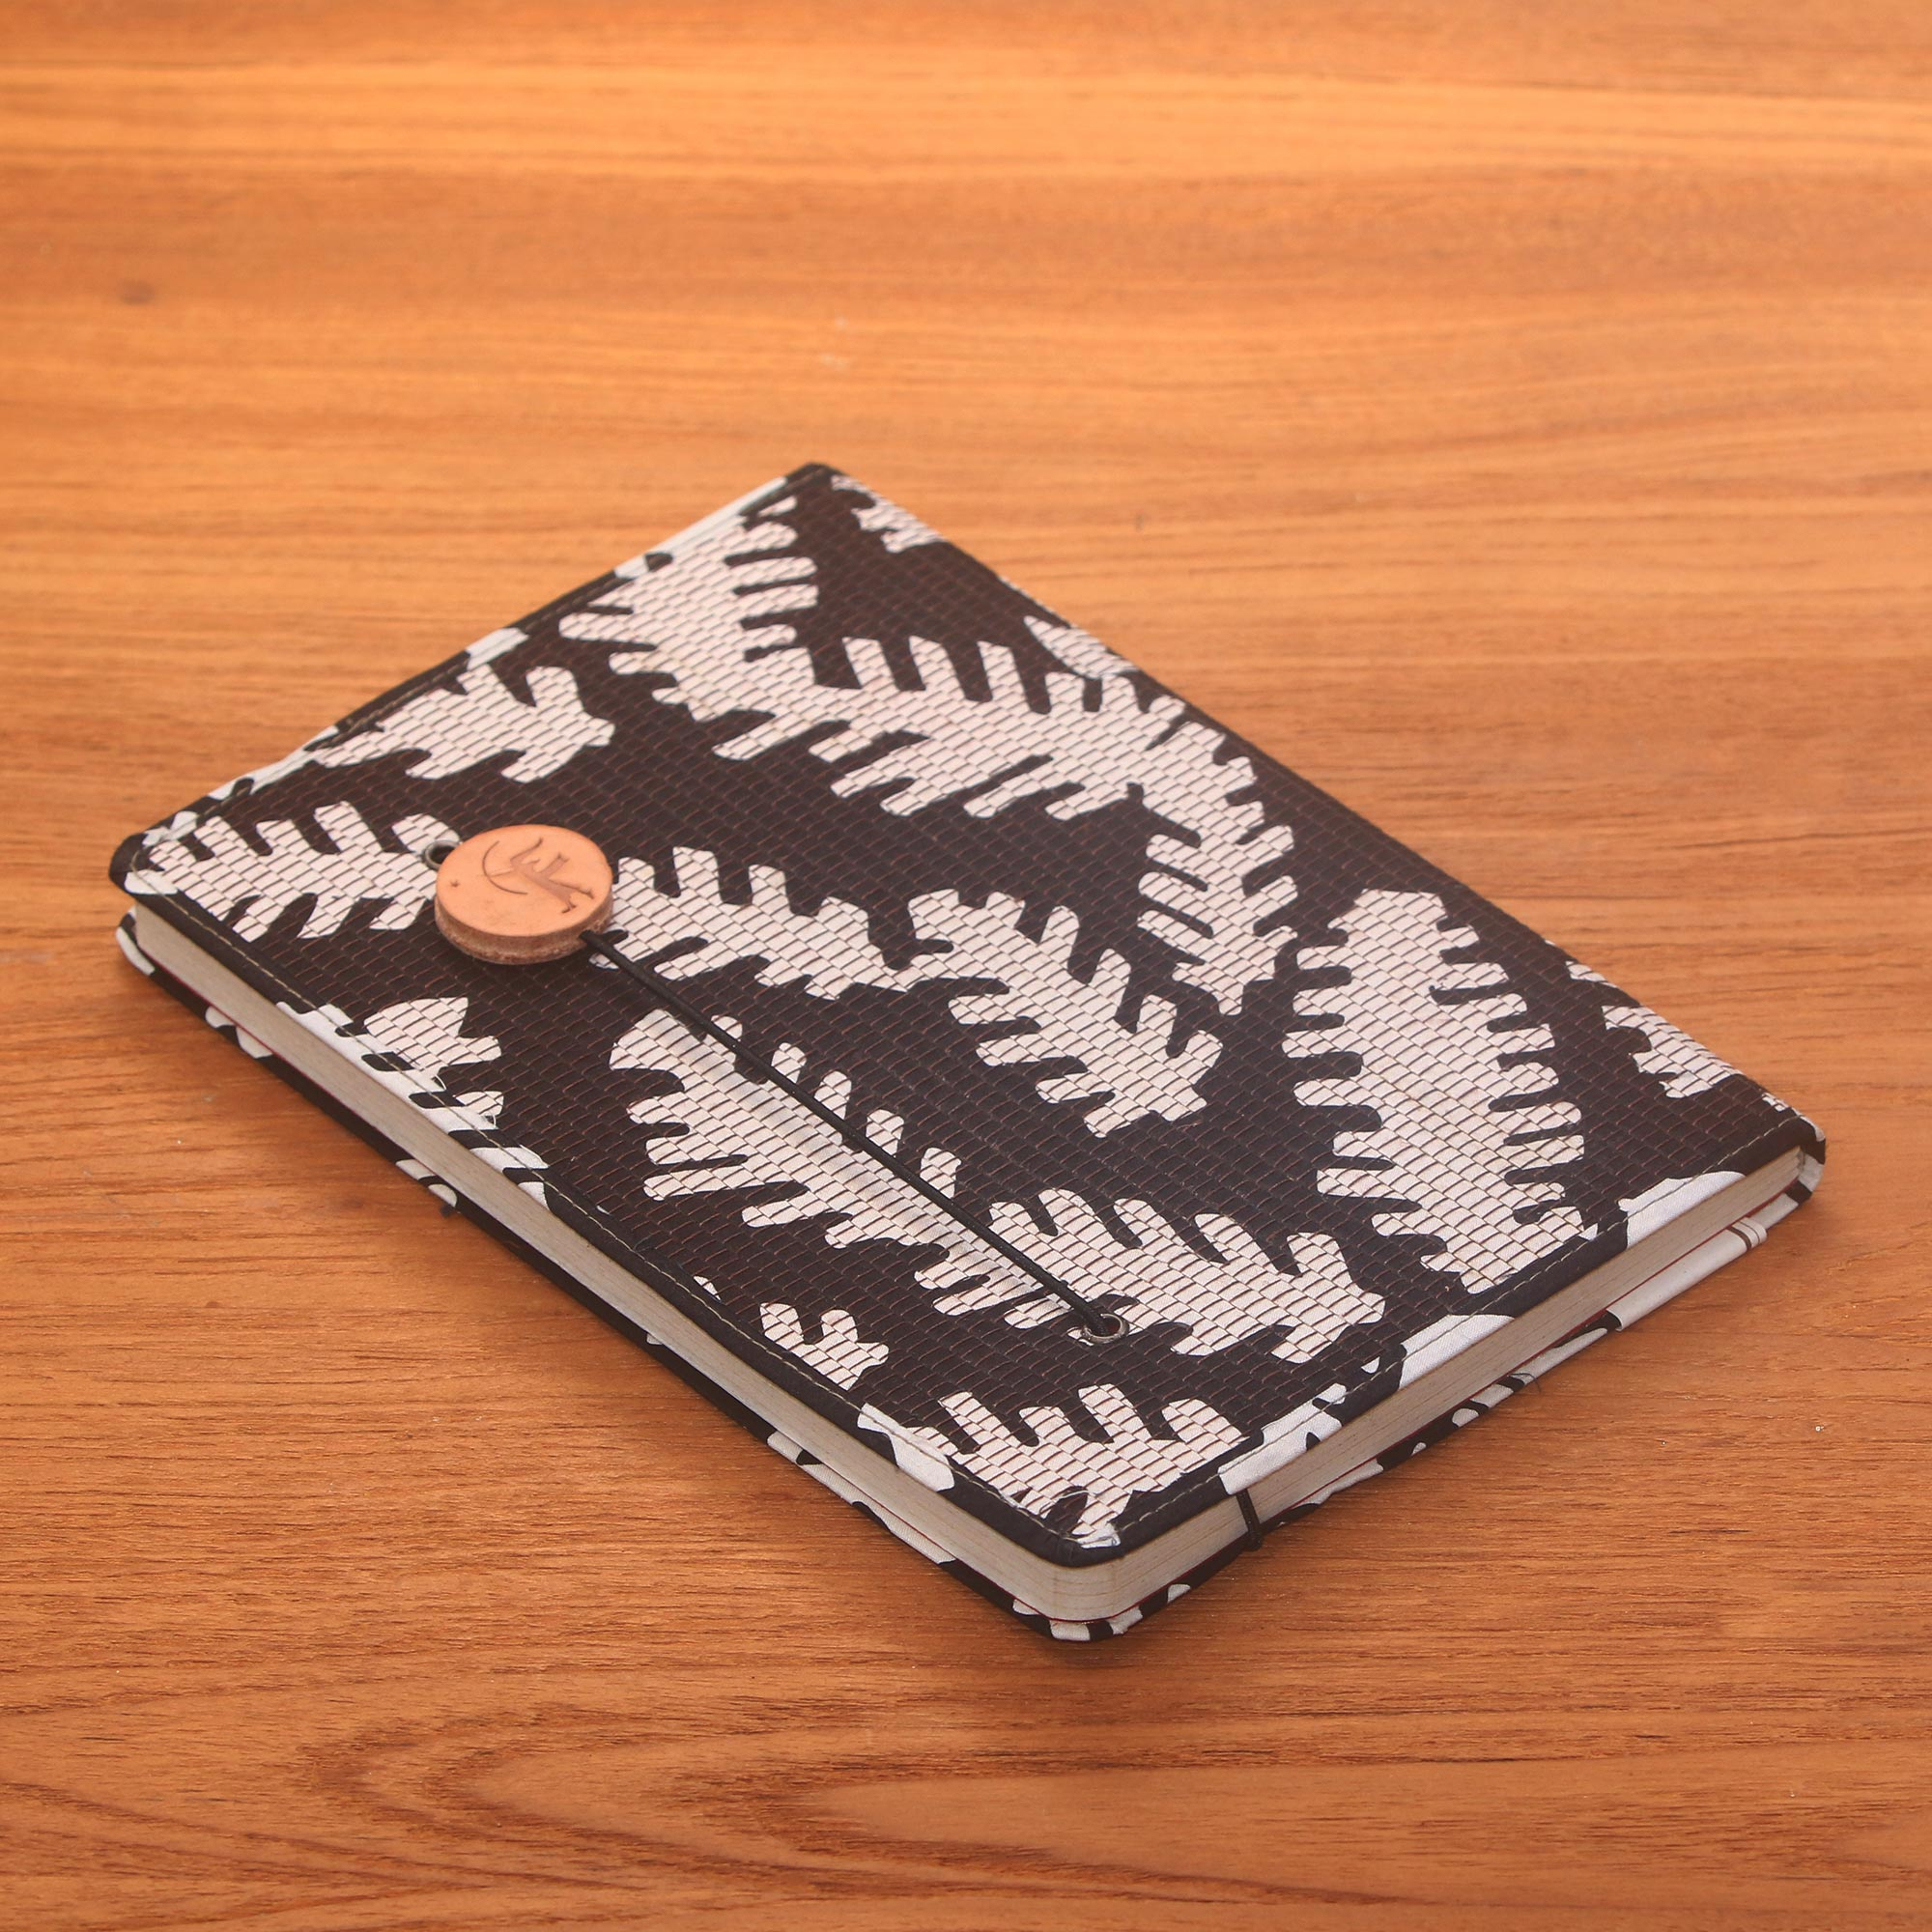 Black Leaf Motif Cotton Cover Journal Recycled Paper - Archer in the ...